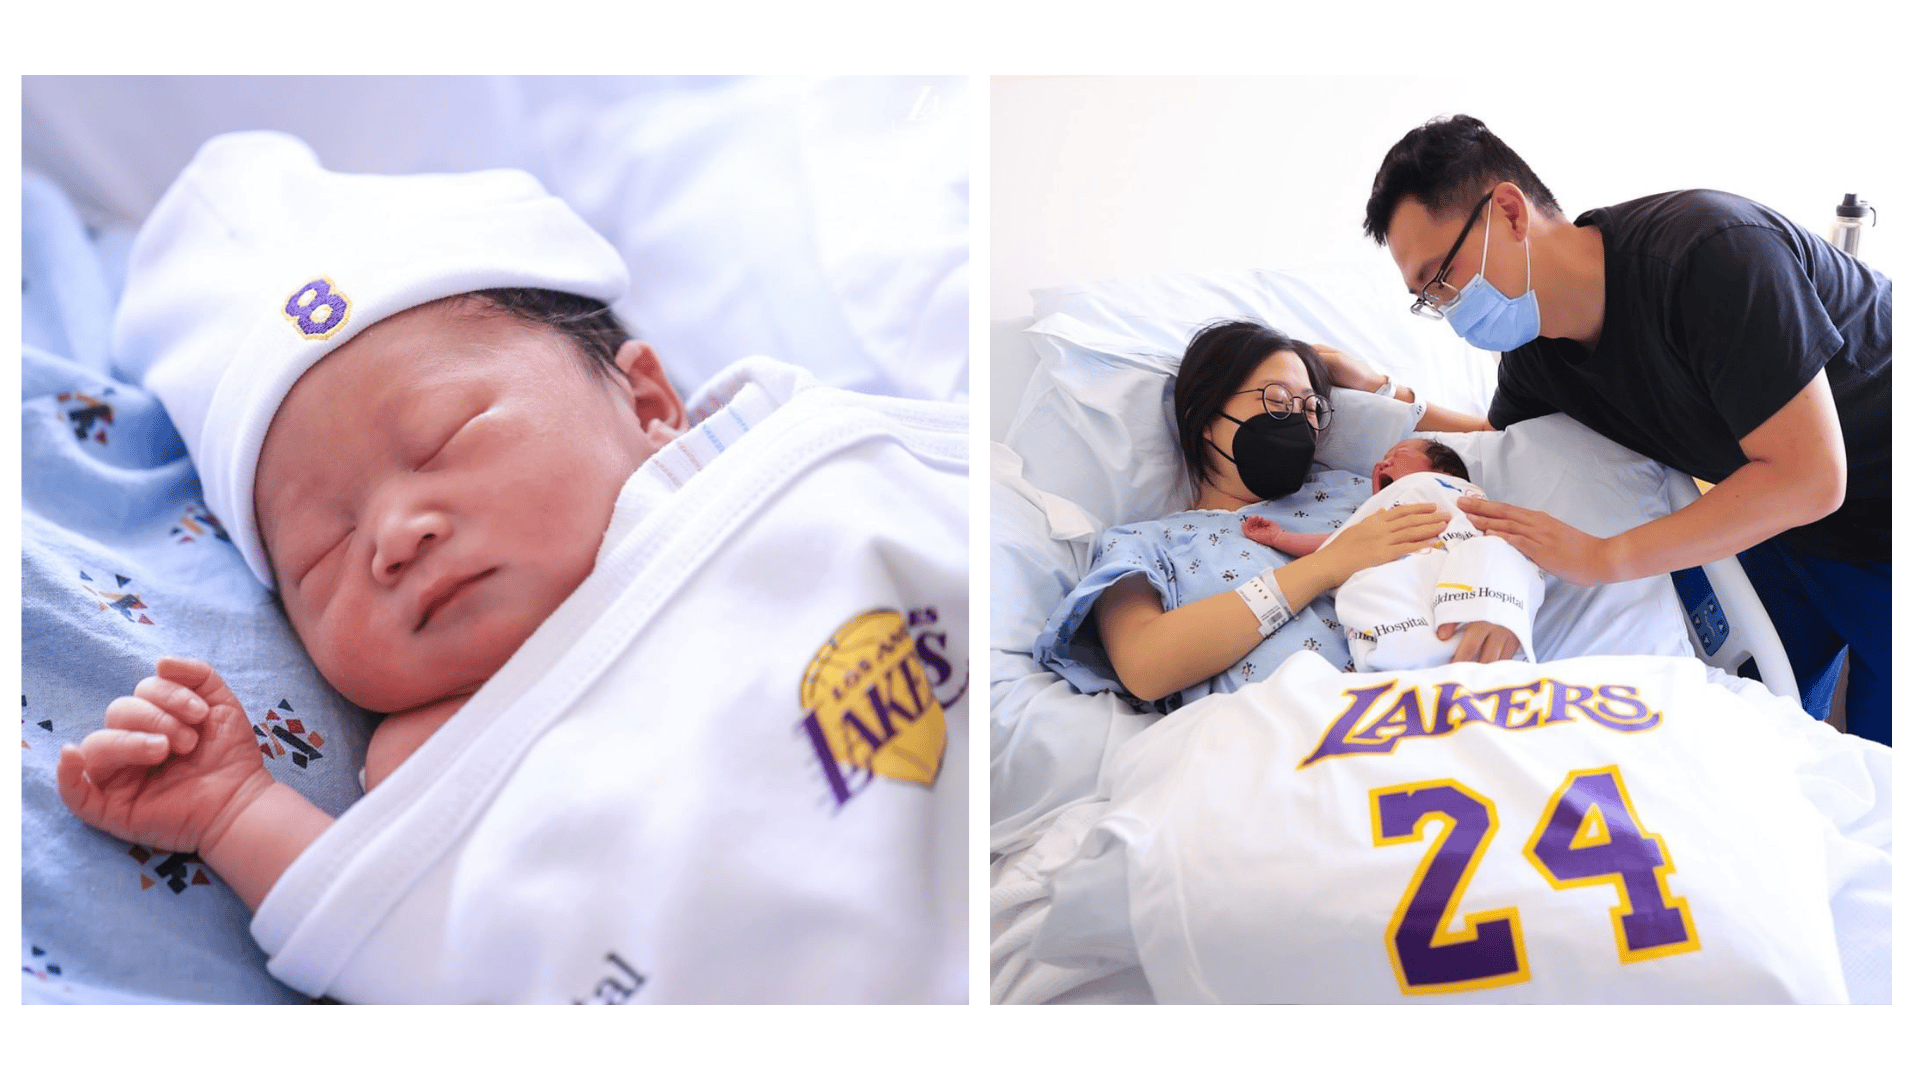 Lakers baby/toddler clothes Lakers baby gift Lakers basketball baby gift